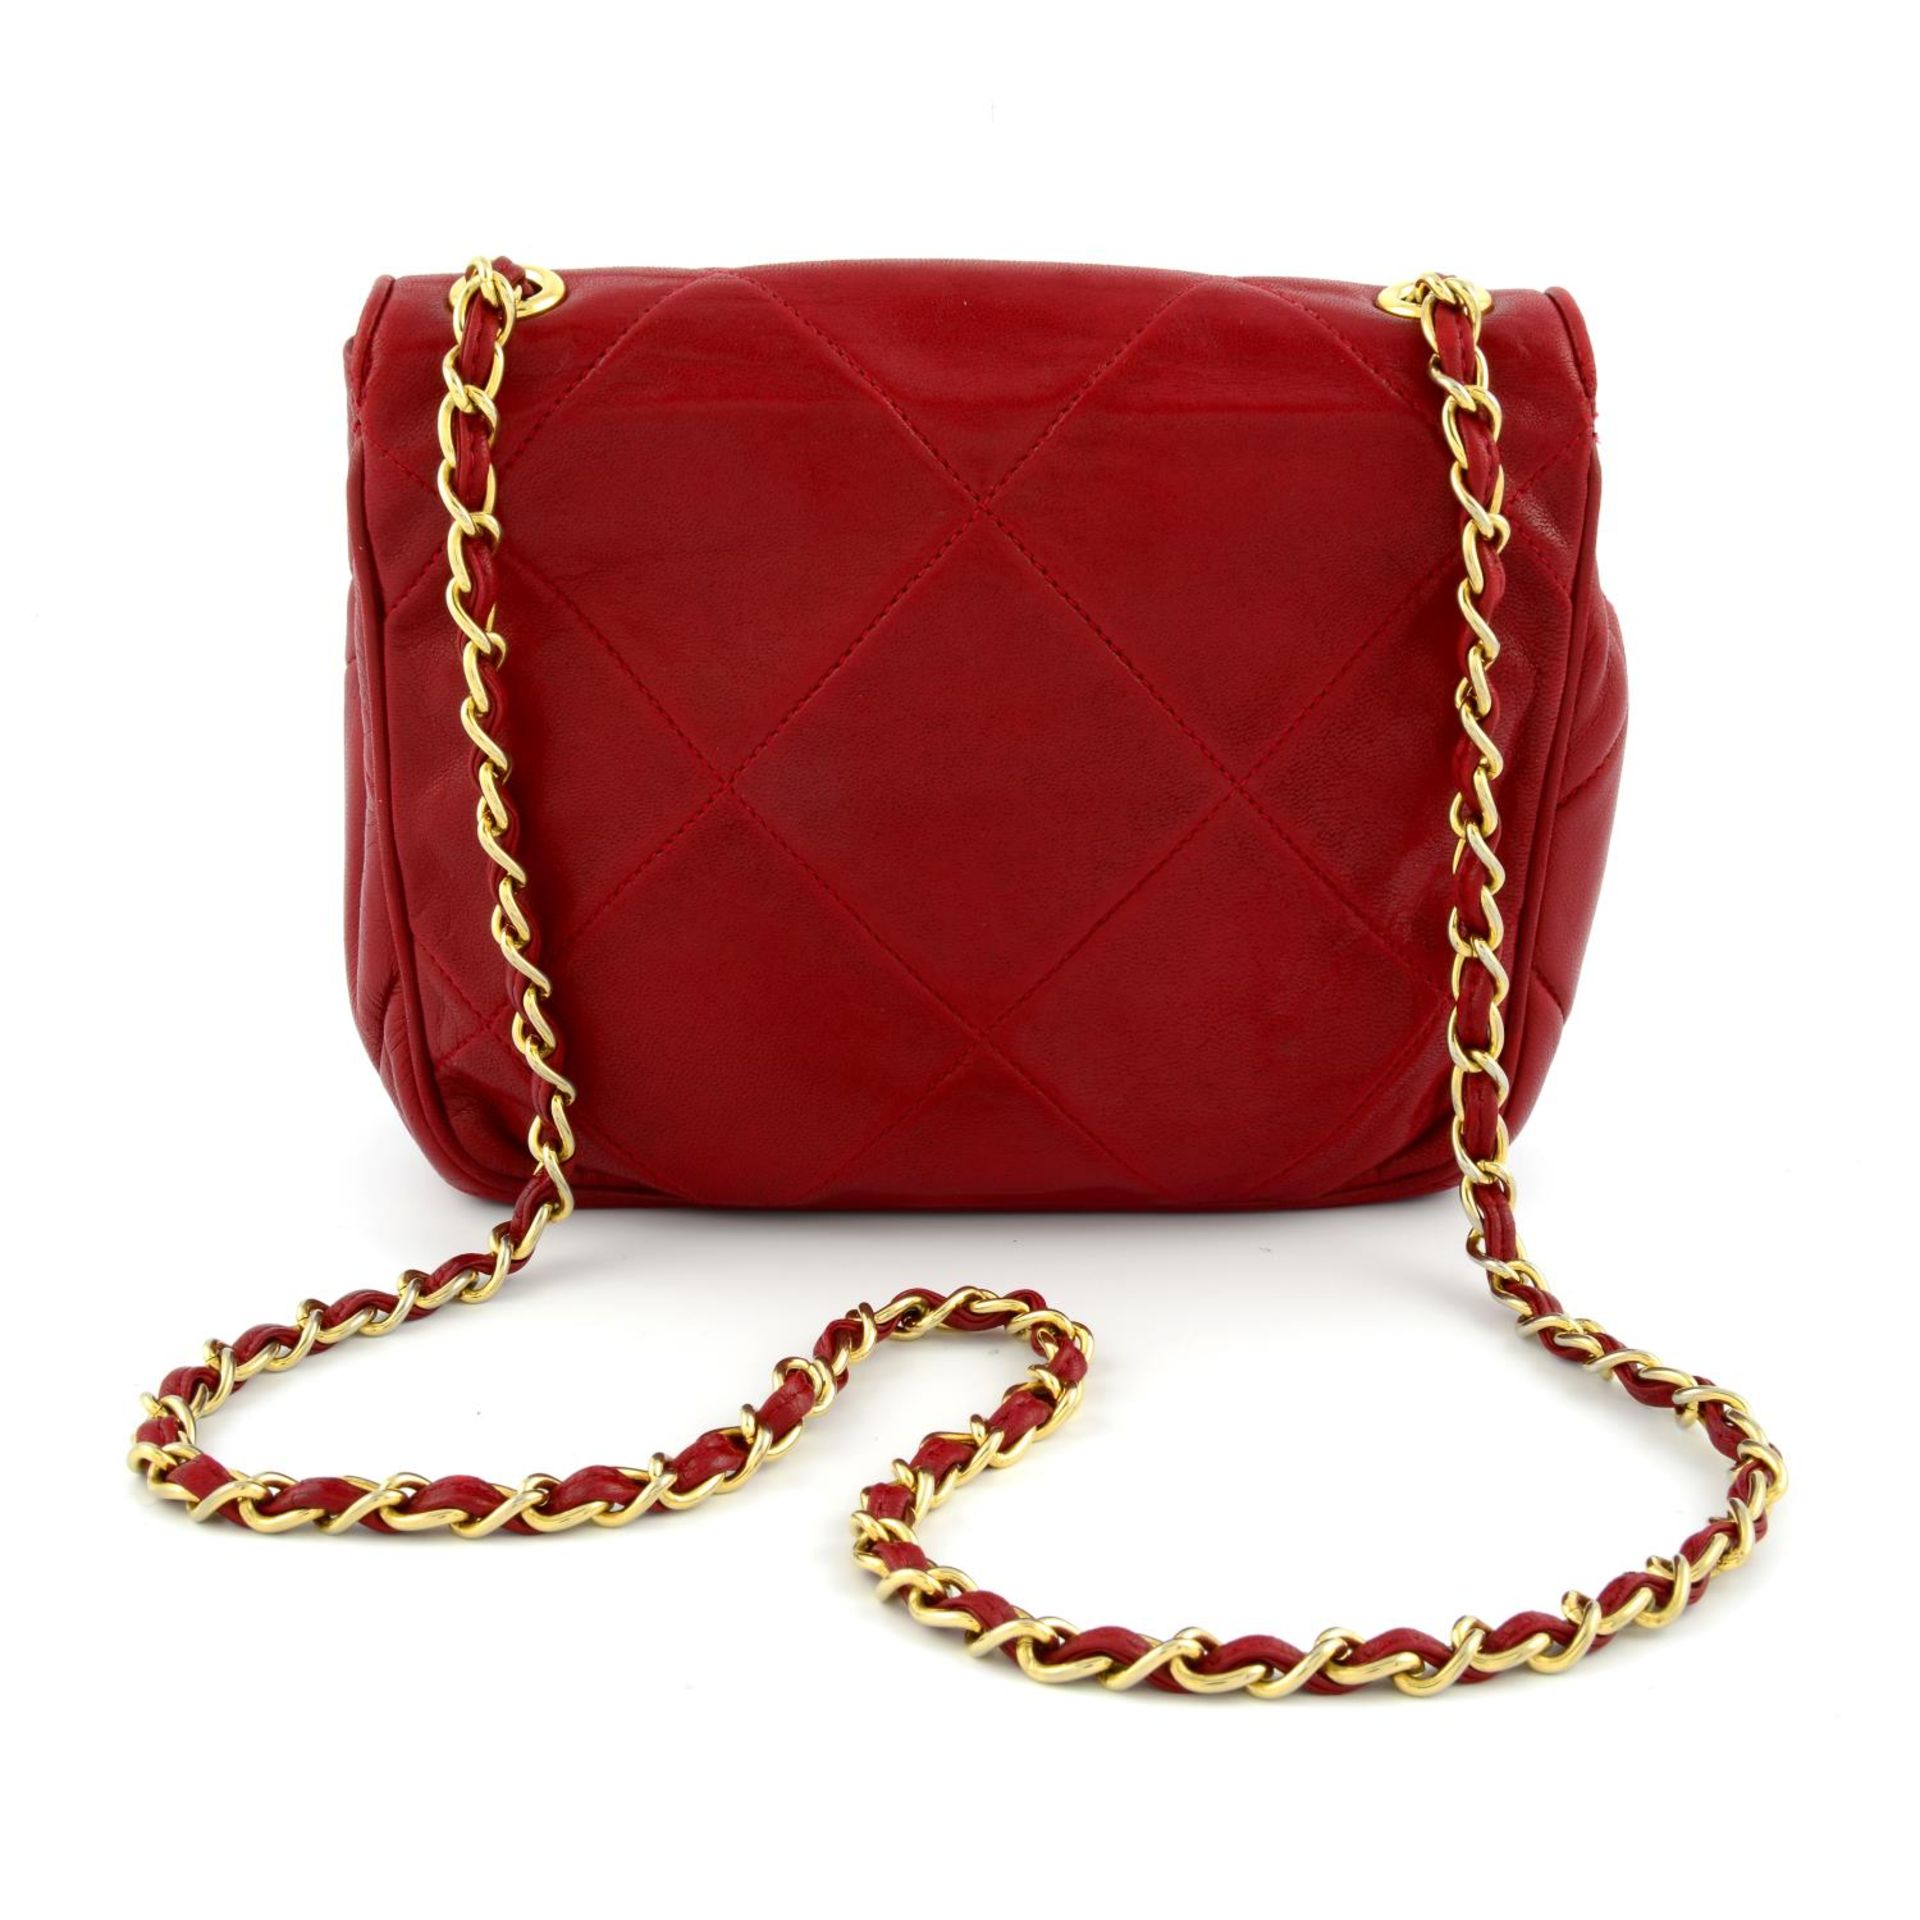 CHANEL - a red leather flap crossbody handbag. - Image 2 of 6